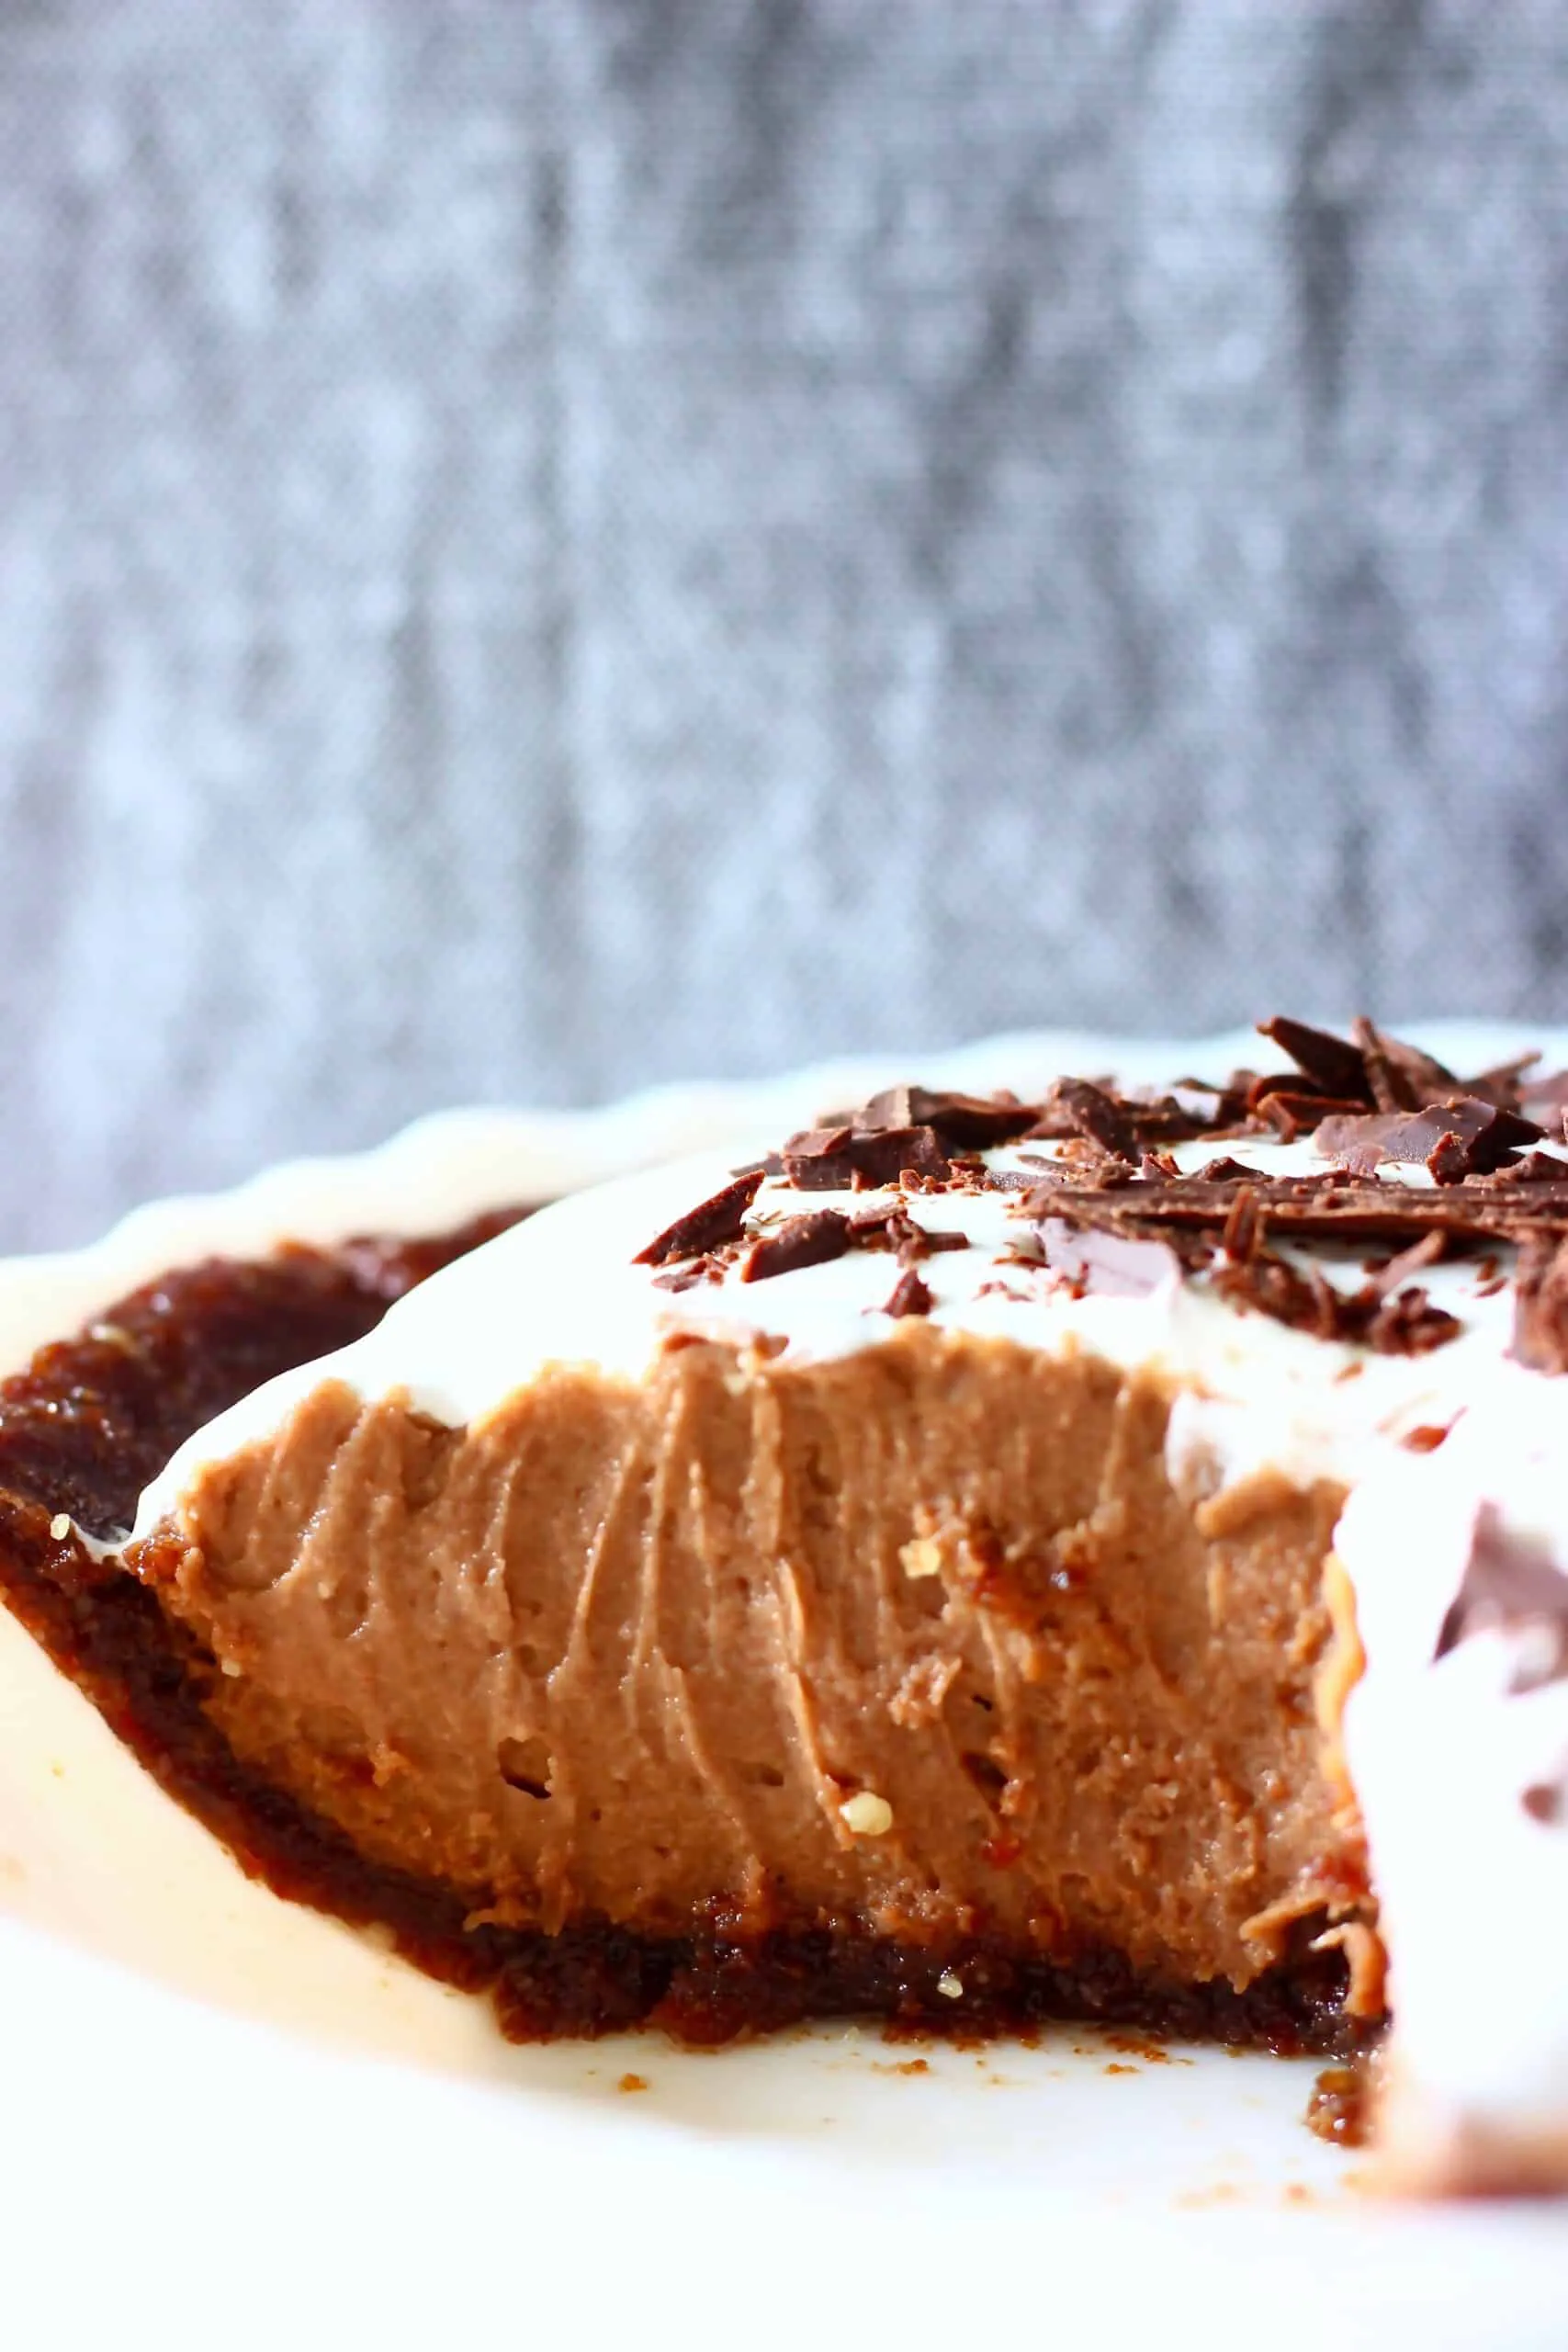 A sliced vegan chocolate pie topped with cream and chocolate shavings